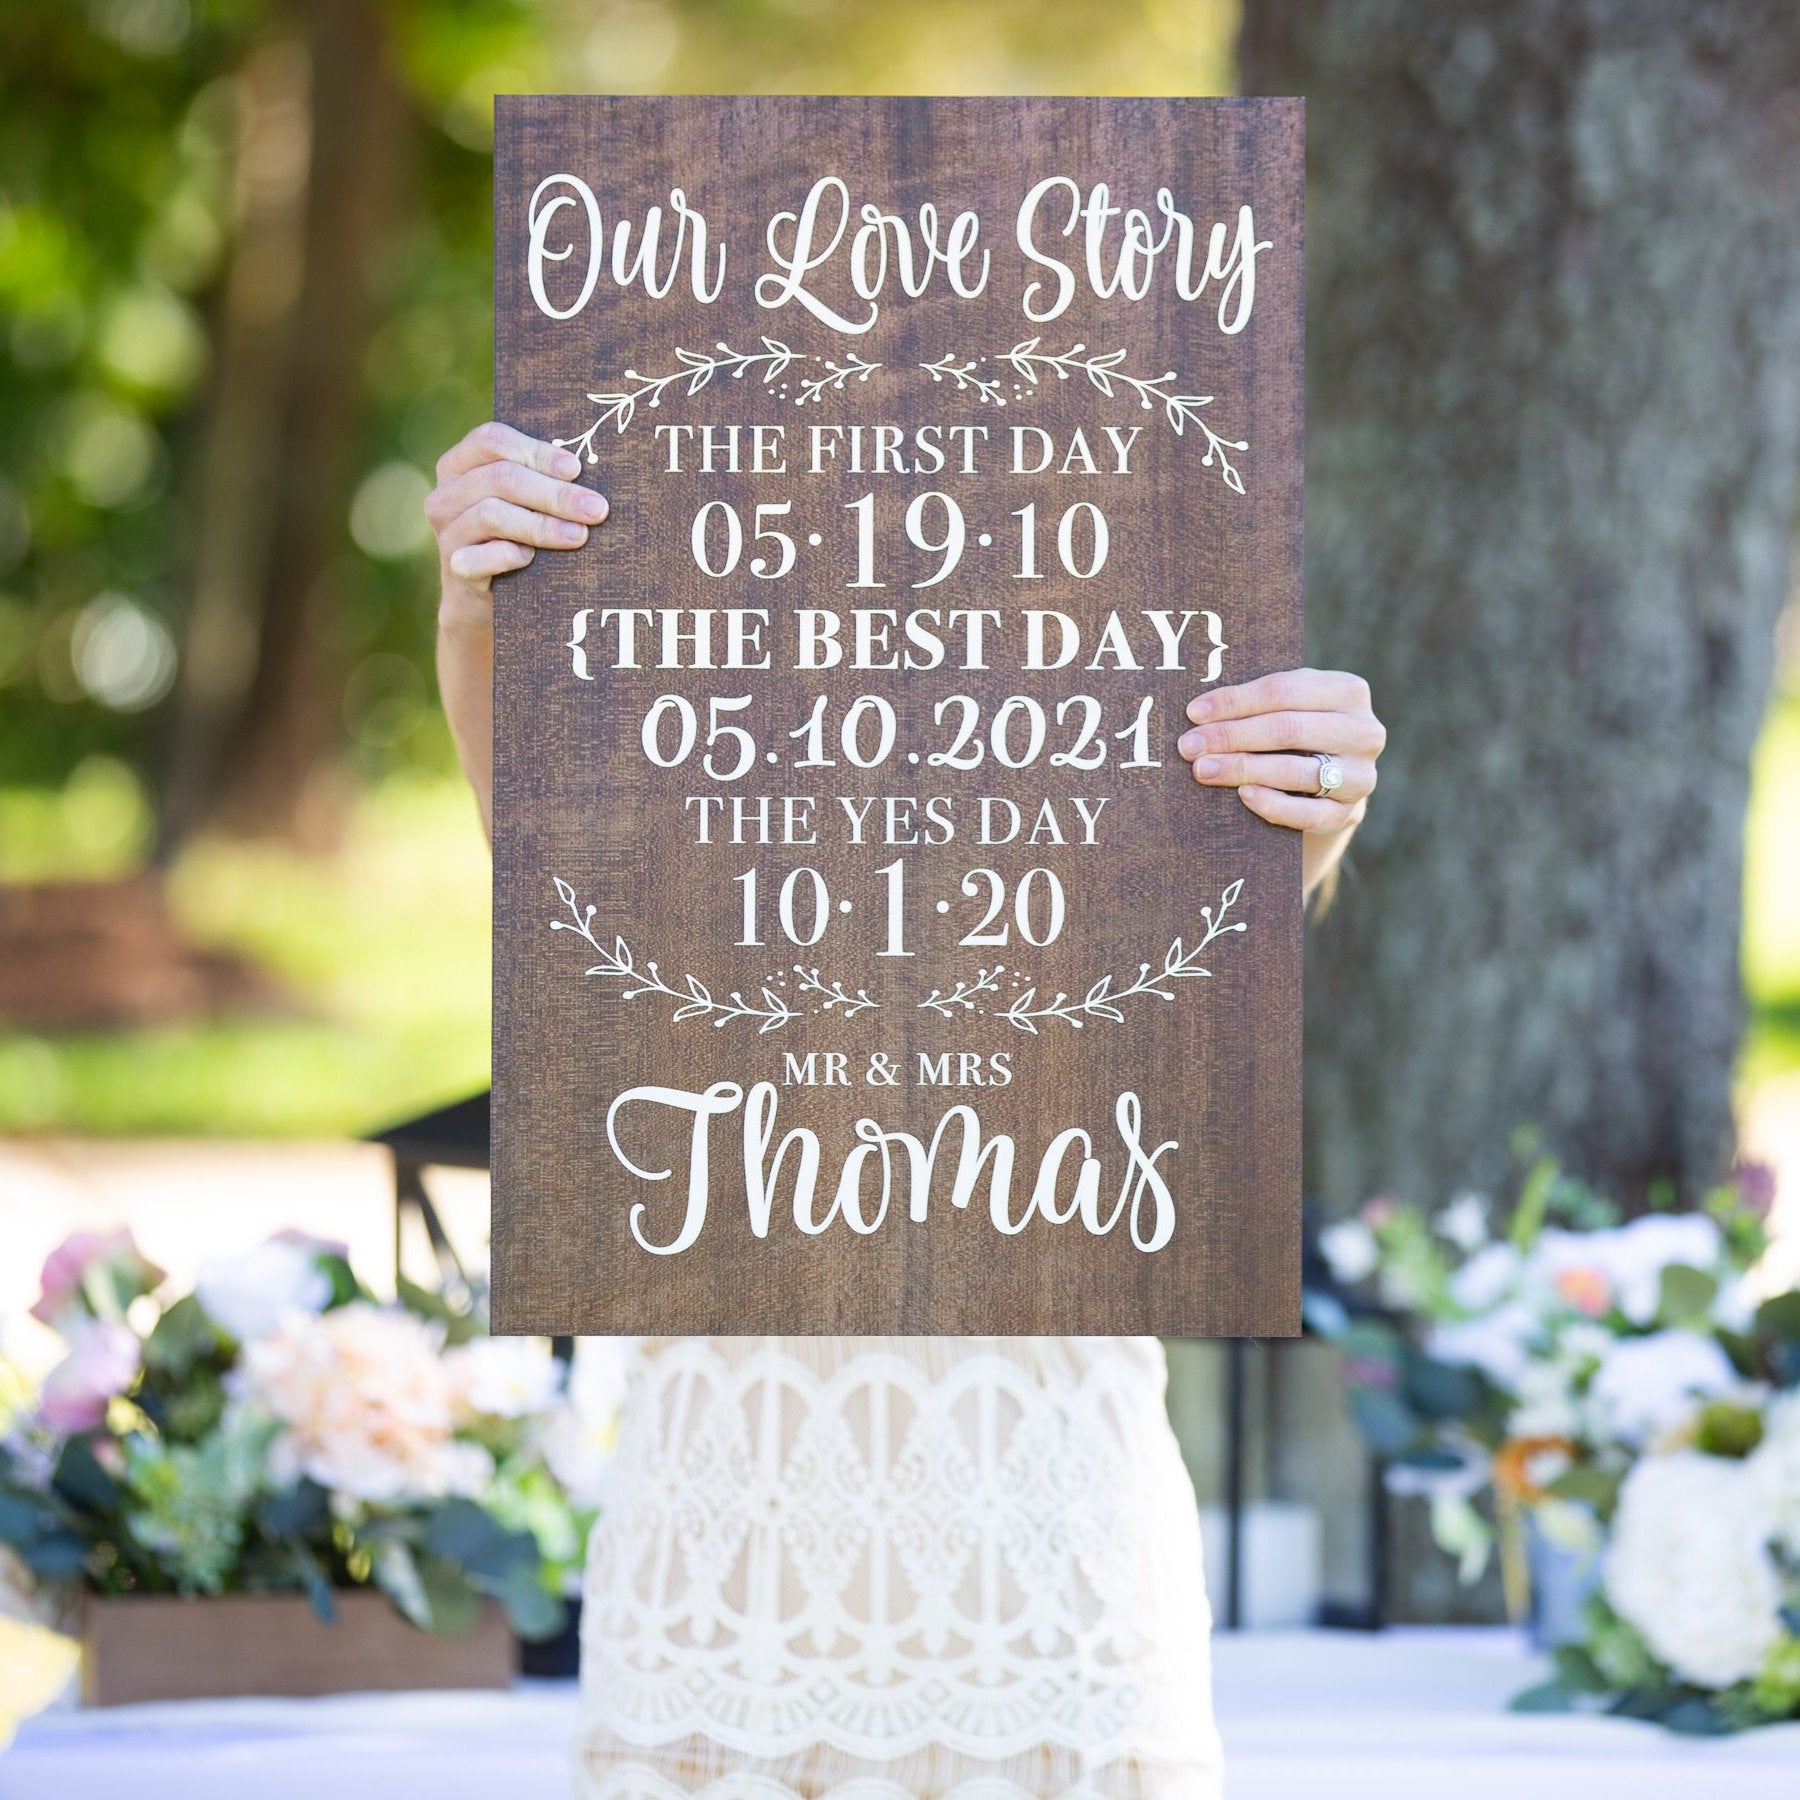 Our Love Story Wedding Sign - Wedding Decor Gifts